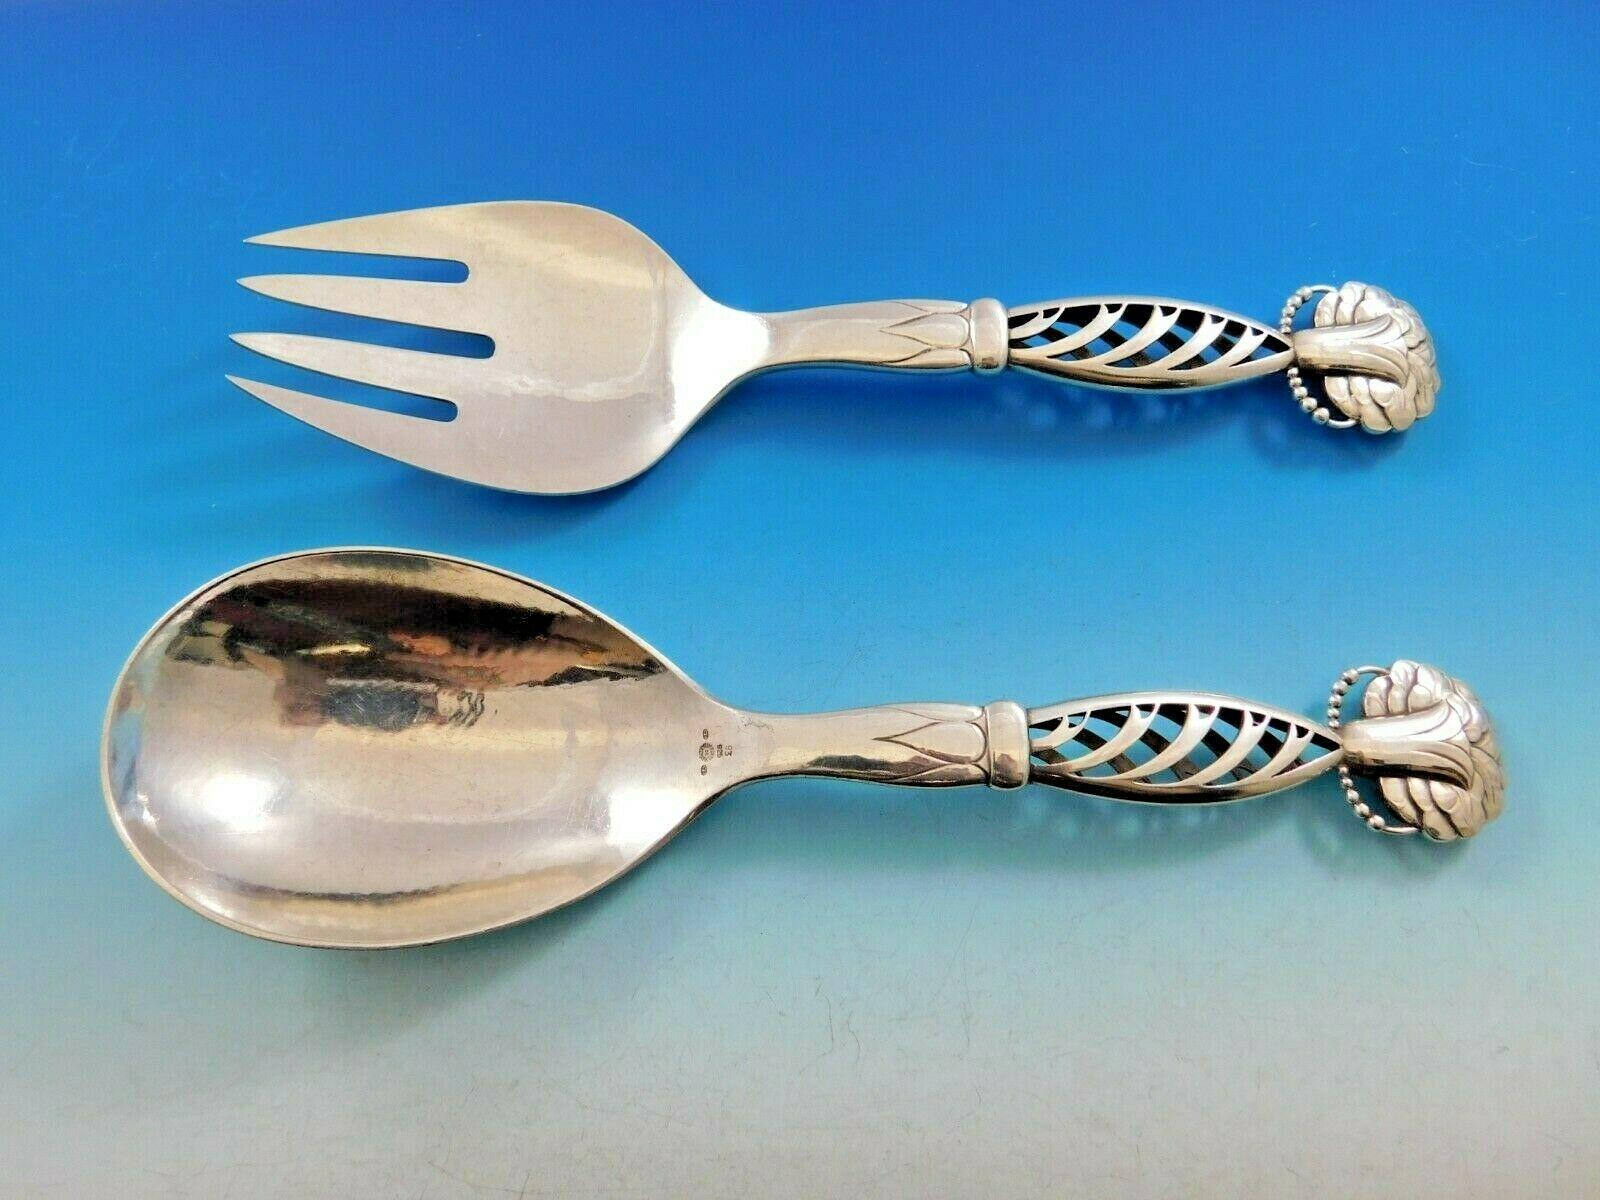 Ornamental #83 by Georg Jensen.

Sterling silver hollow handle salad serving set two-piece 9 1/2